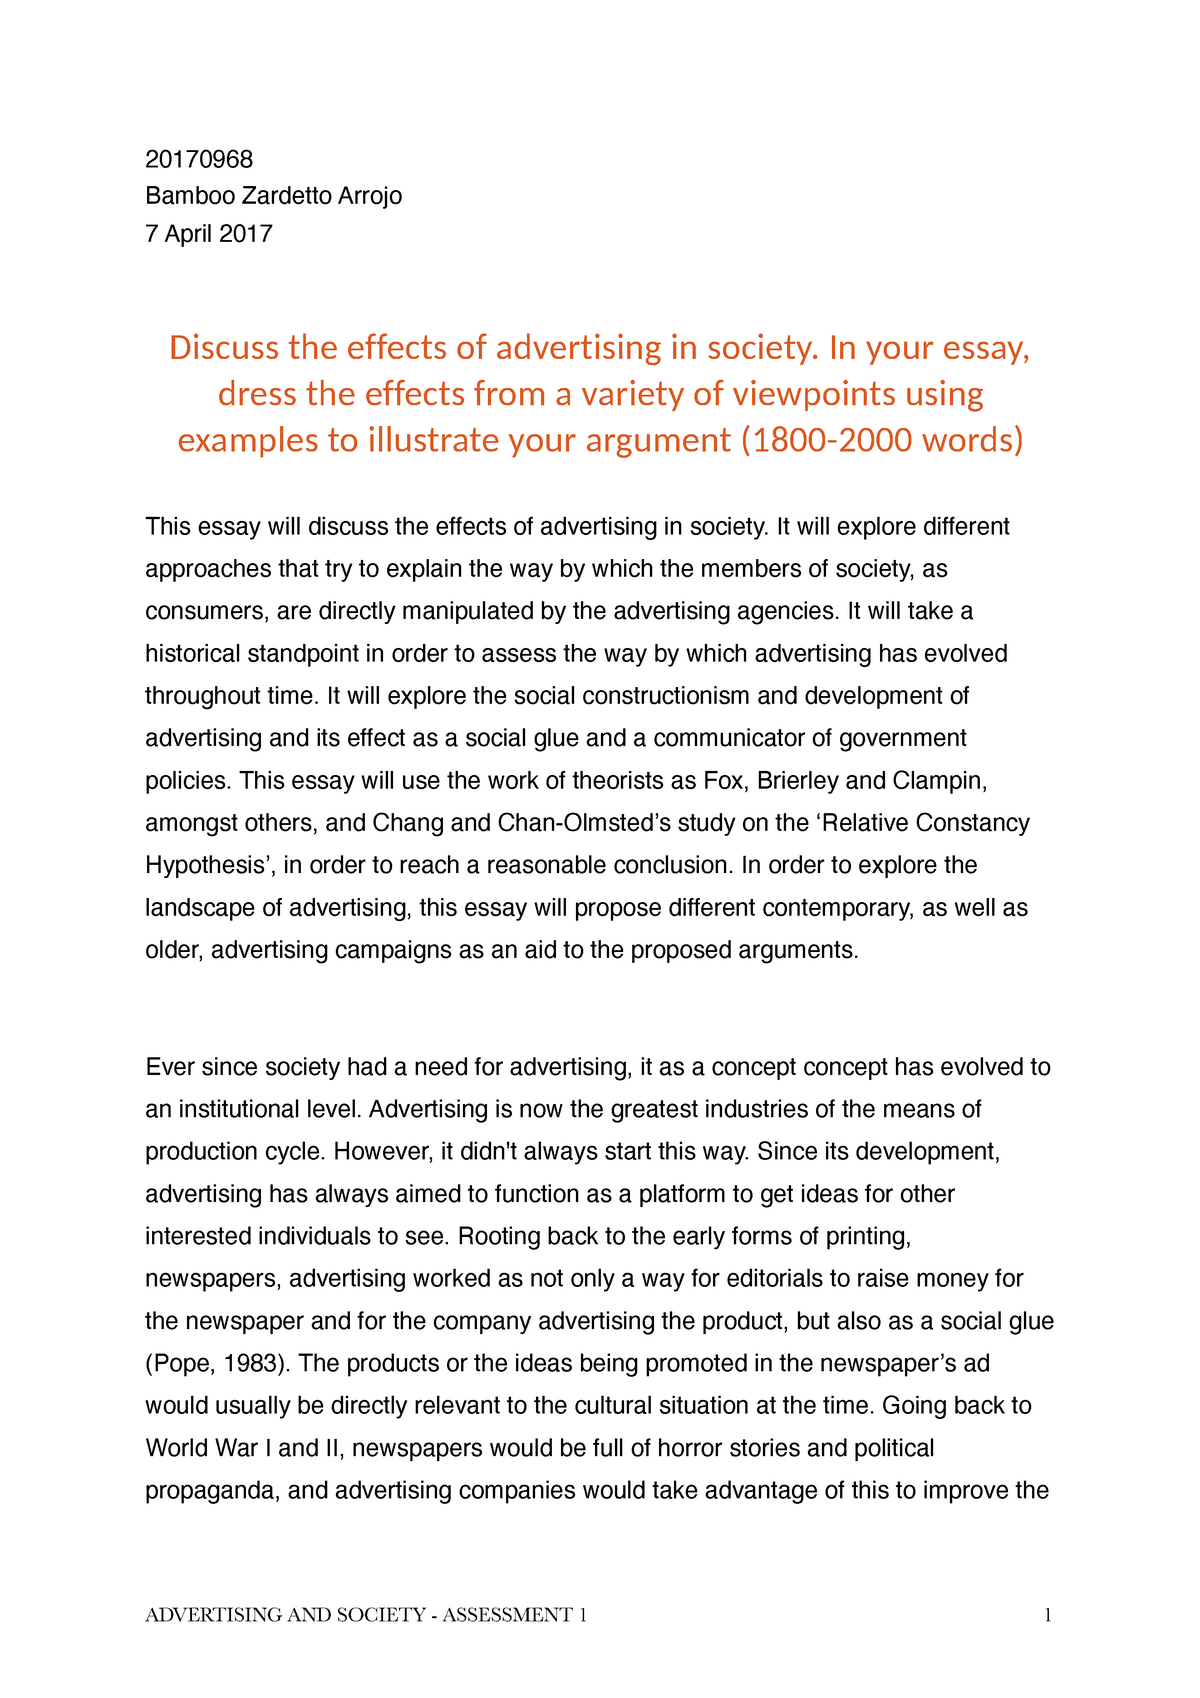 advertising and society essay